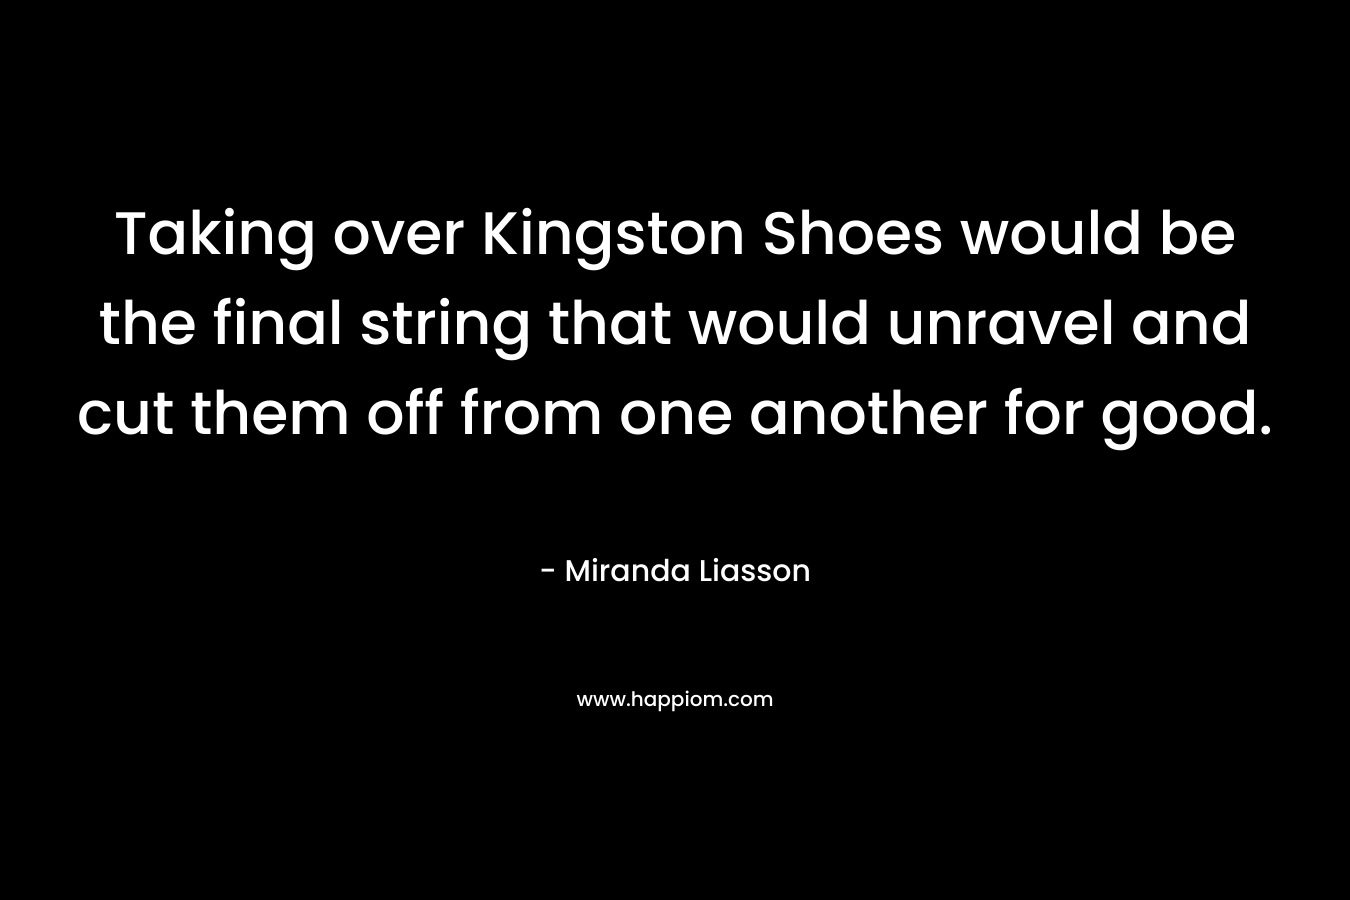 Taking over Kingston Shoes would be the final string that would unravel and cut them off from one another for good.